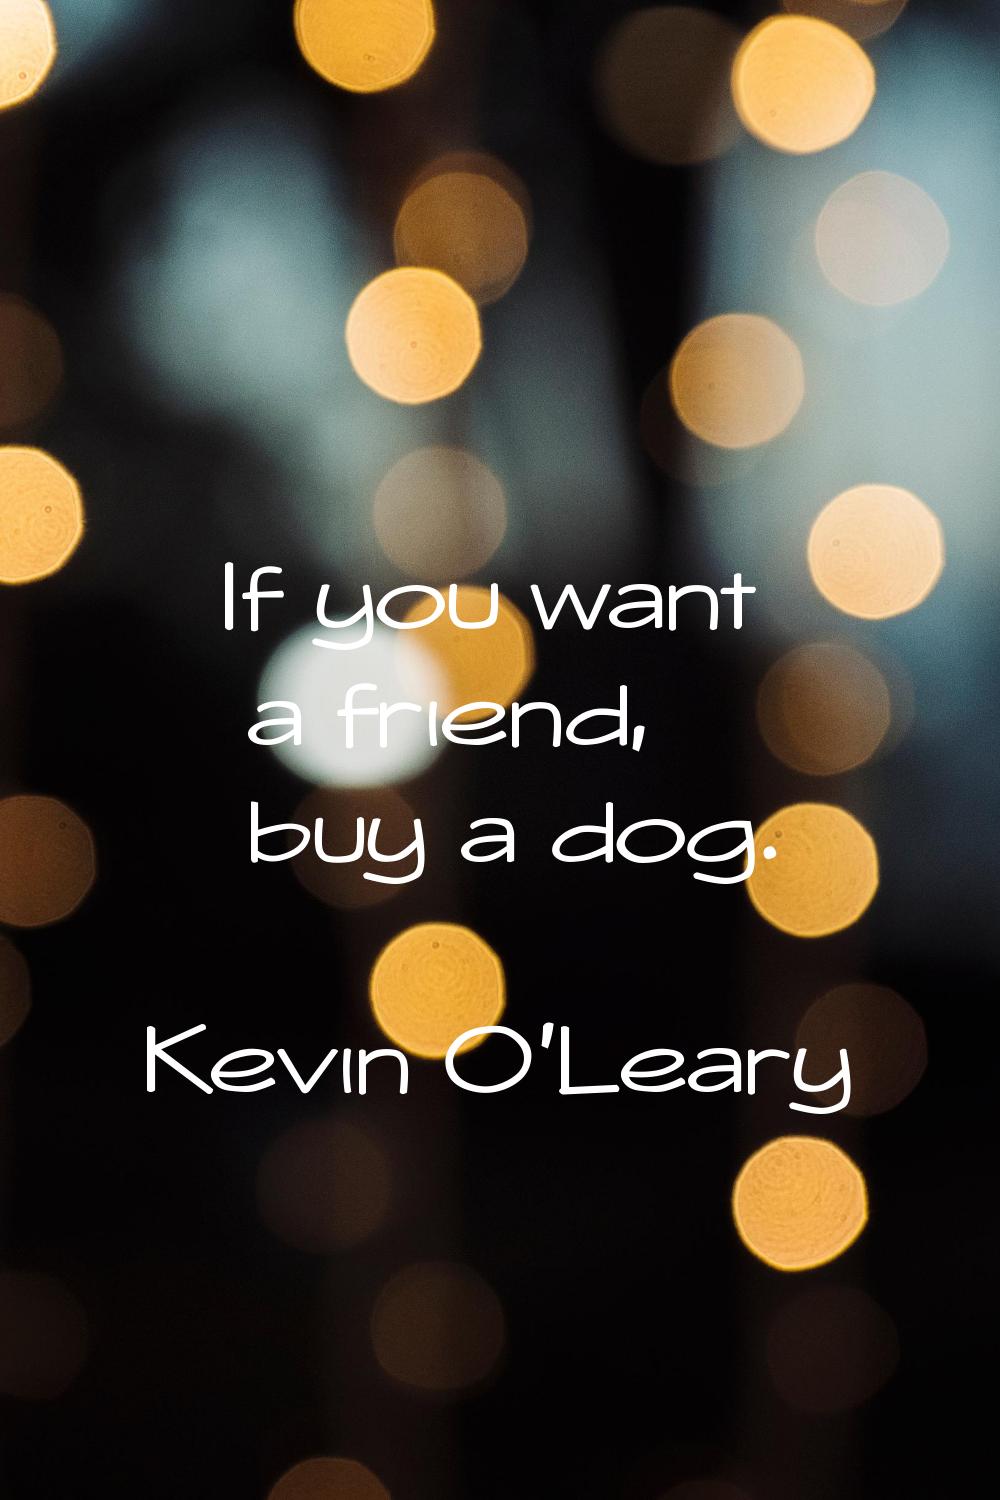 If you want a friend, buy a dog.